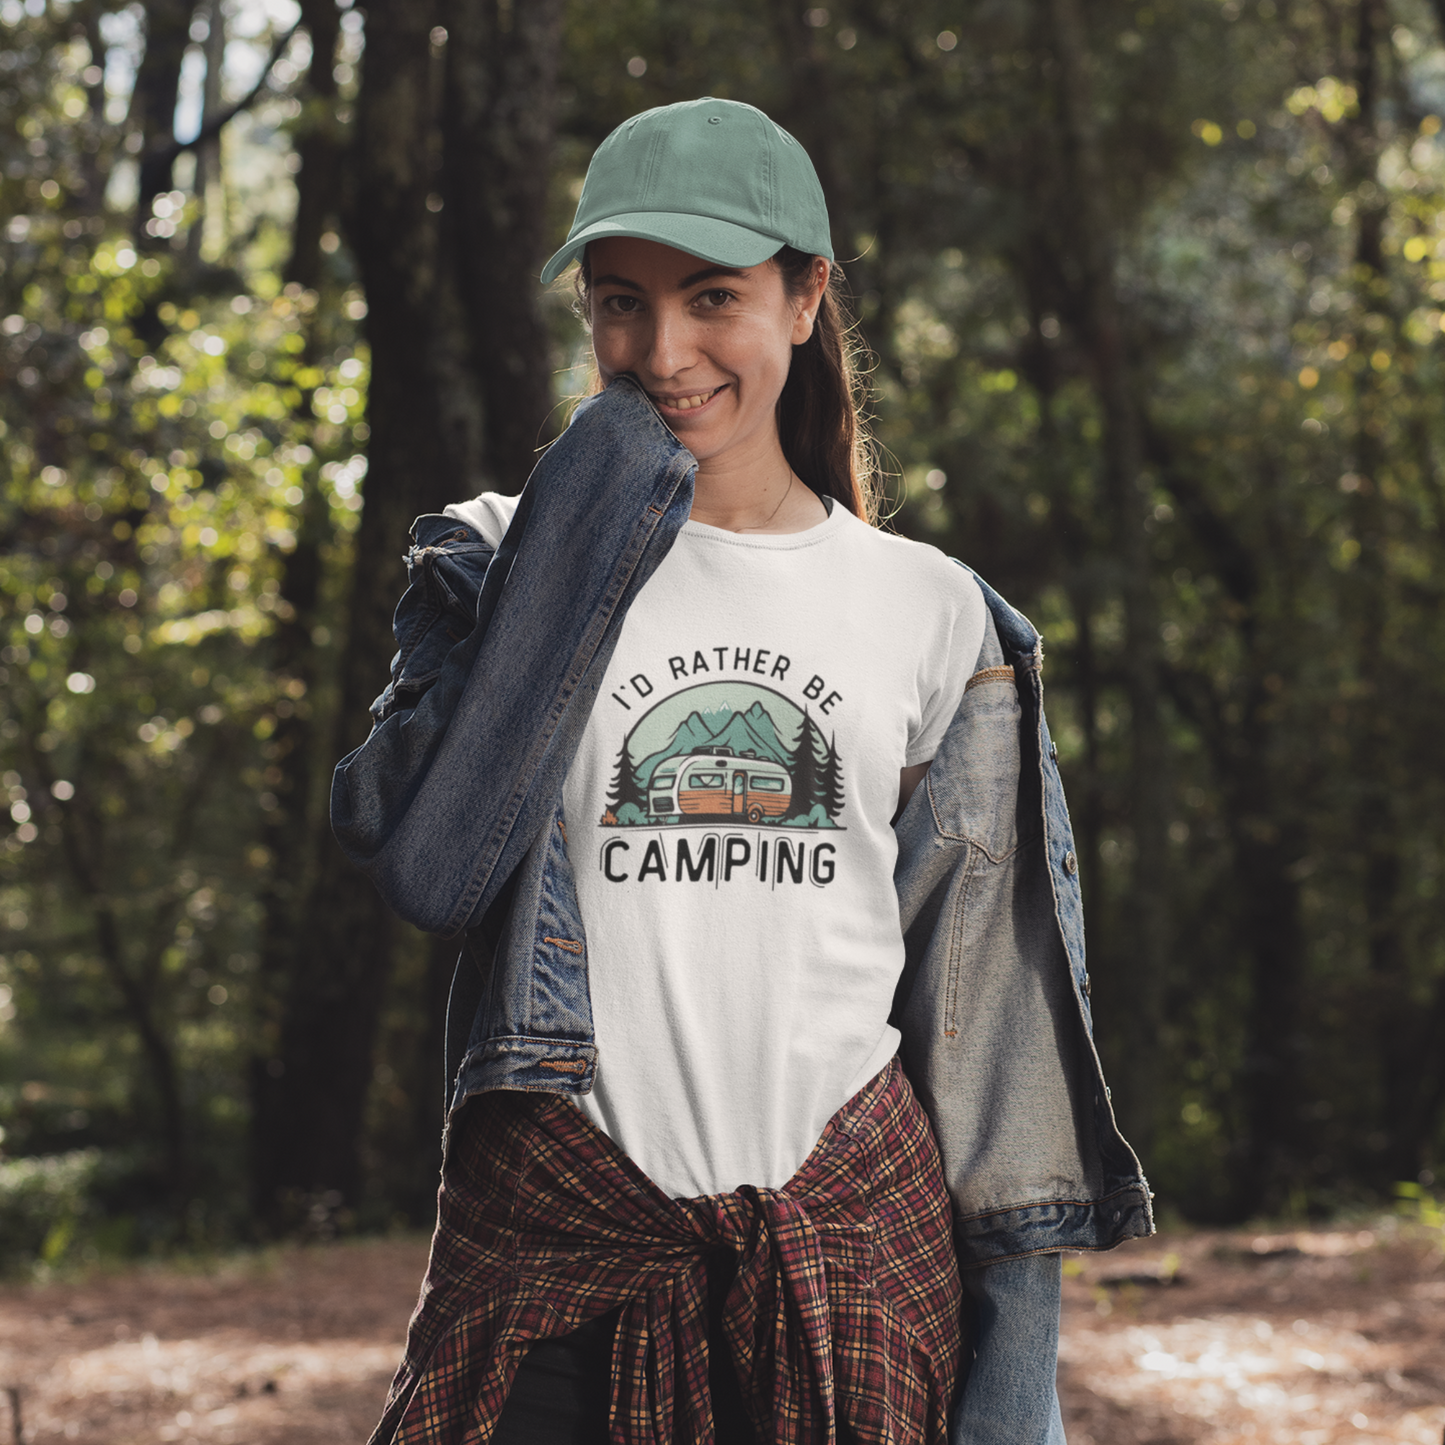 Unisex Softstyle T-Shirt, I'd Rather Be Camping